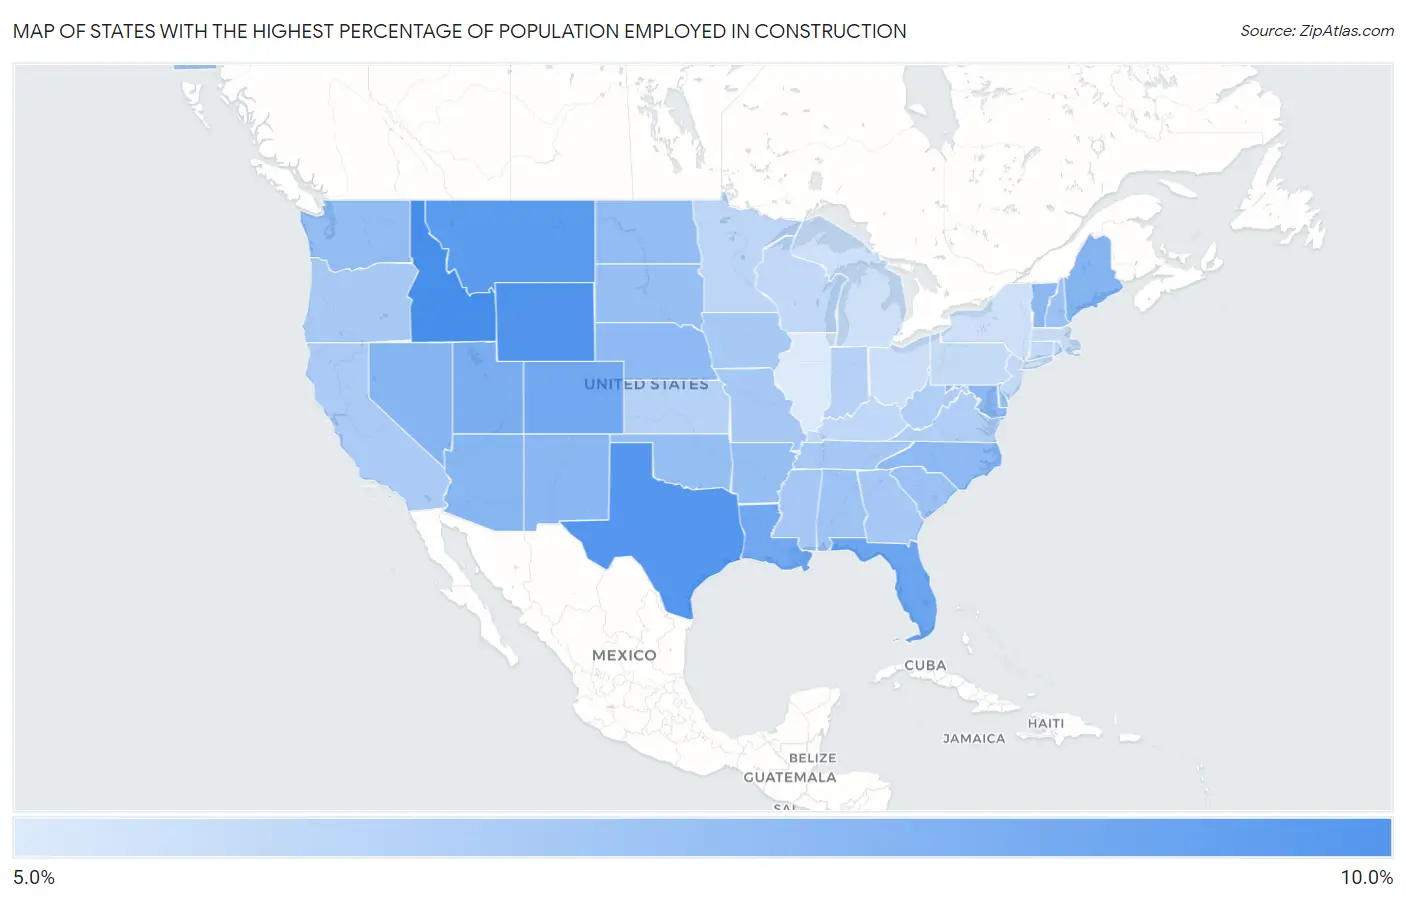 States with the Highest Percentage of Population Employed in Construction in the United States Map